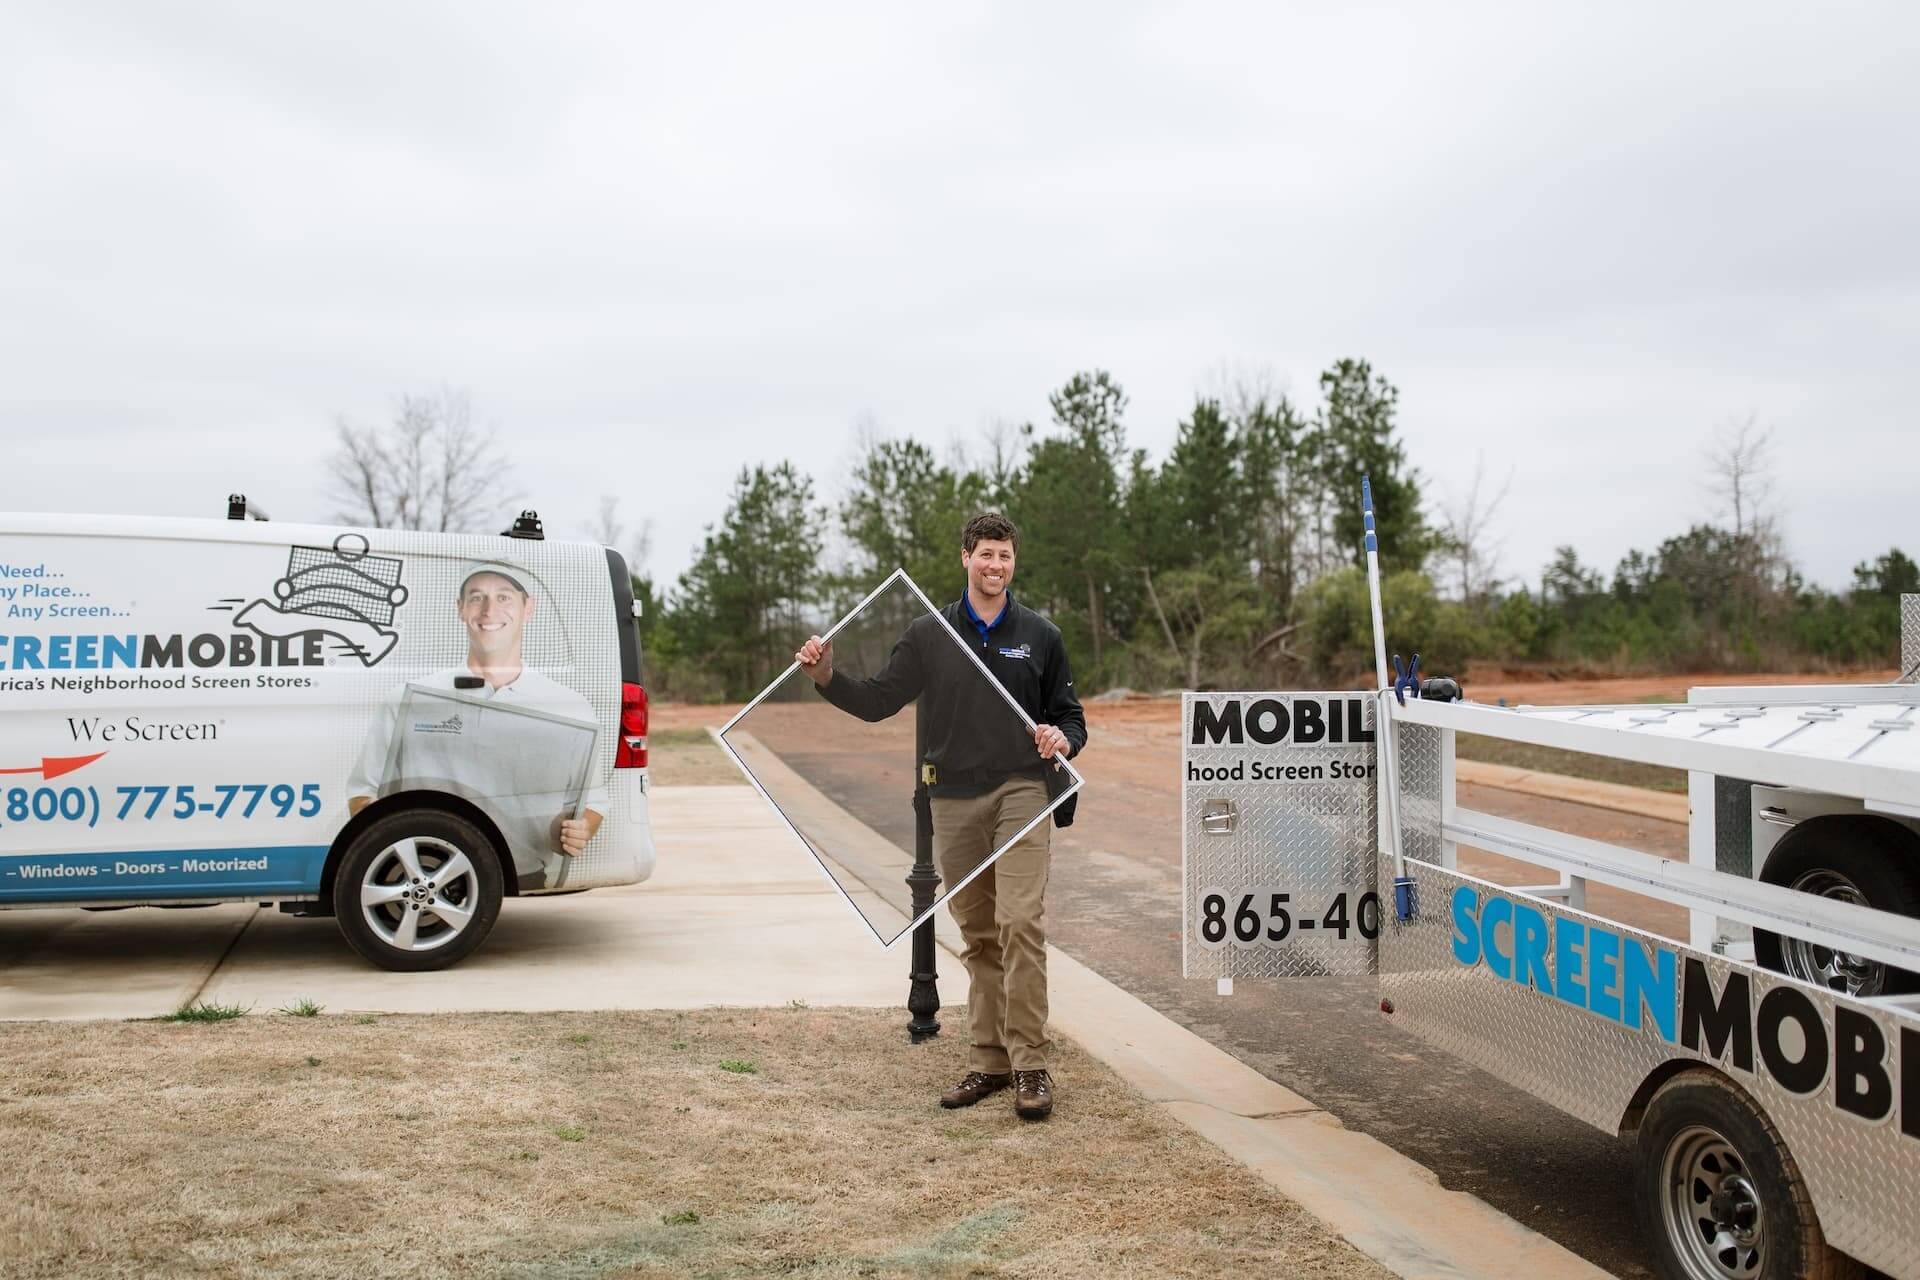 A Screenmobile pro carries a screen to a client's home. A Screenmobile van and trailer are parked at the home.